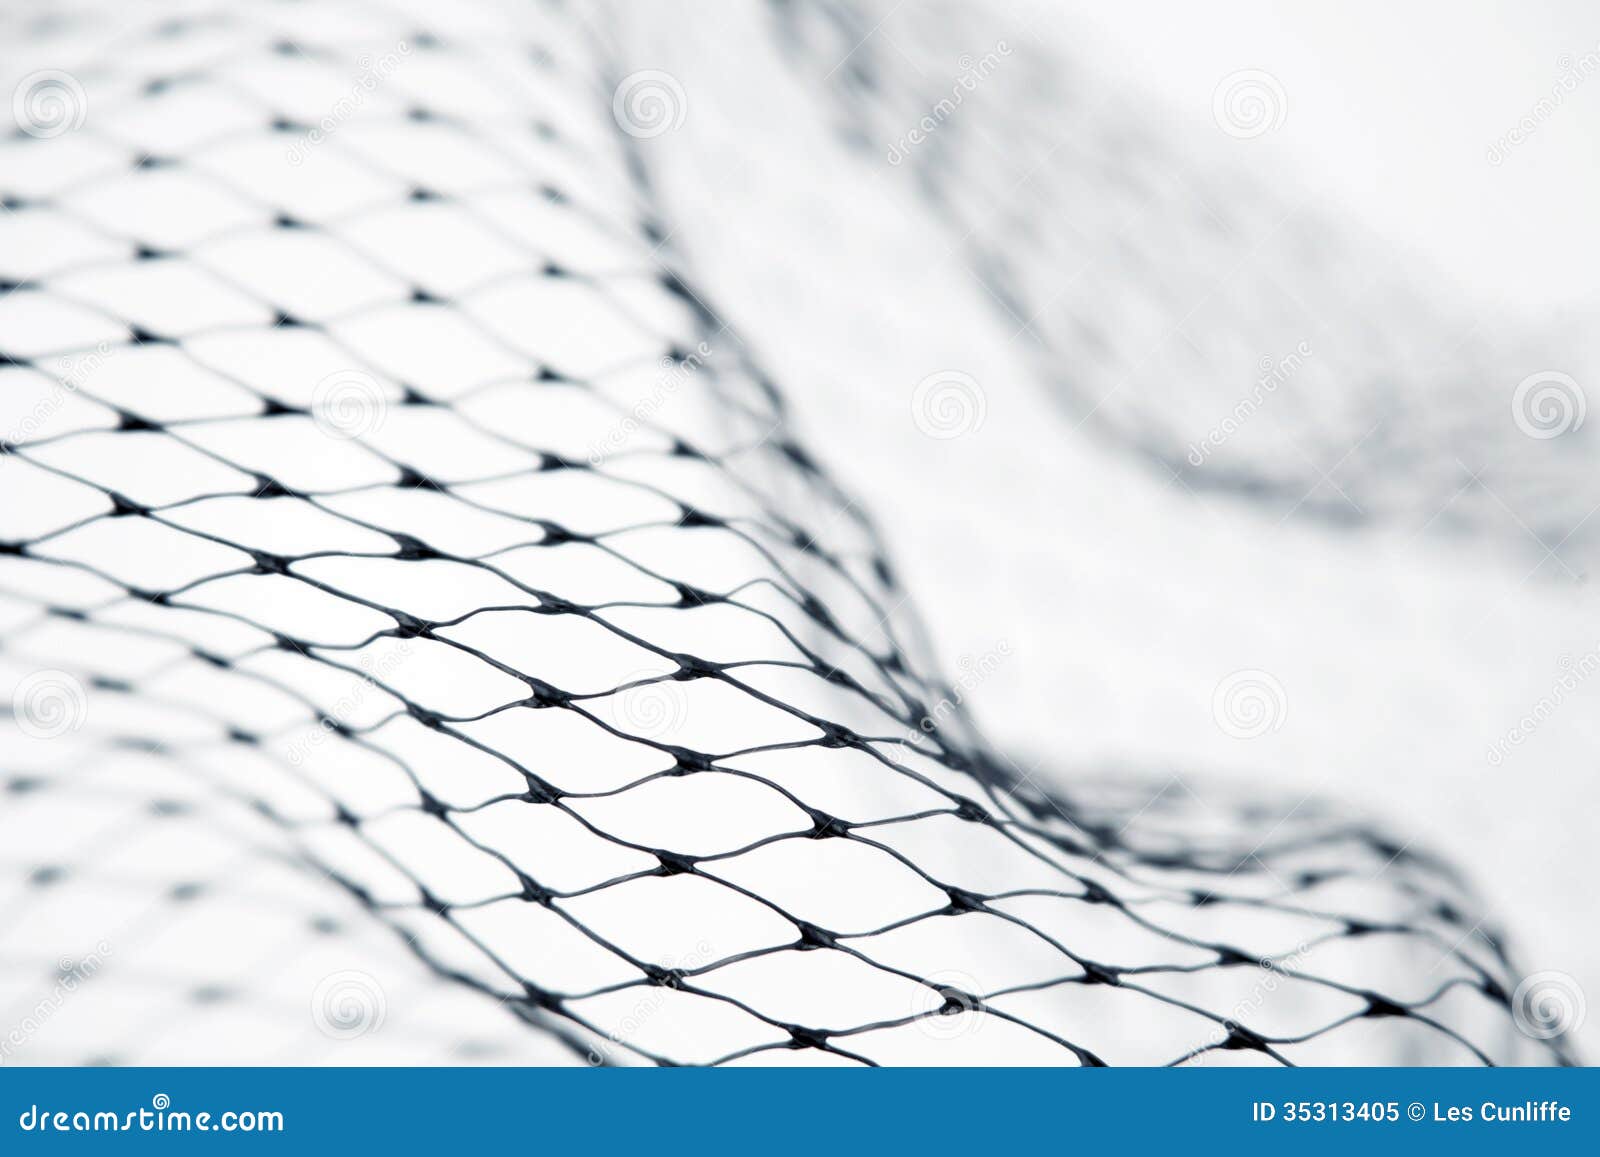 5,800 Fishnet Texture Stock Photos - Free & Royalty-Free Stock Photos from  Dreamstime